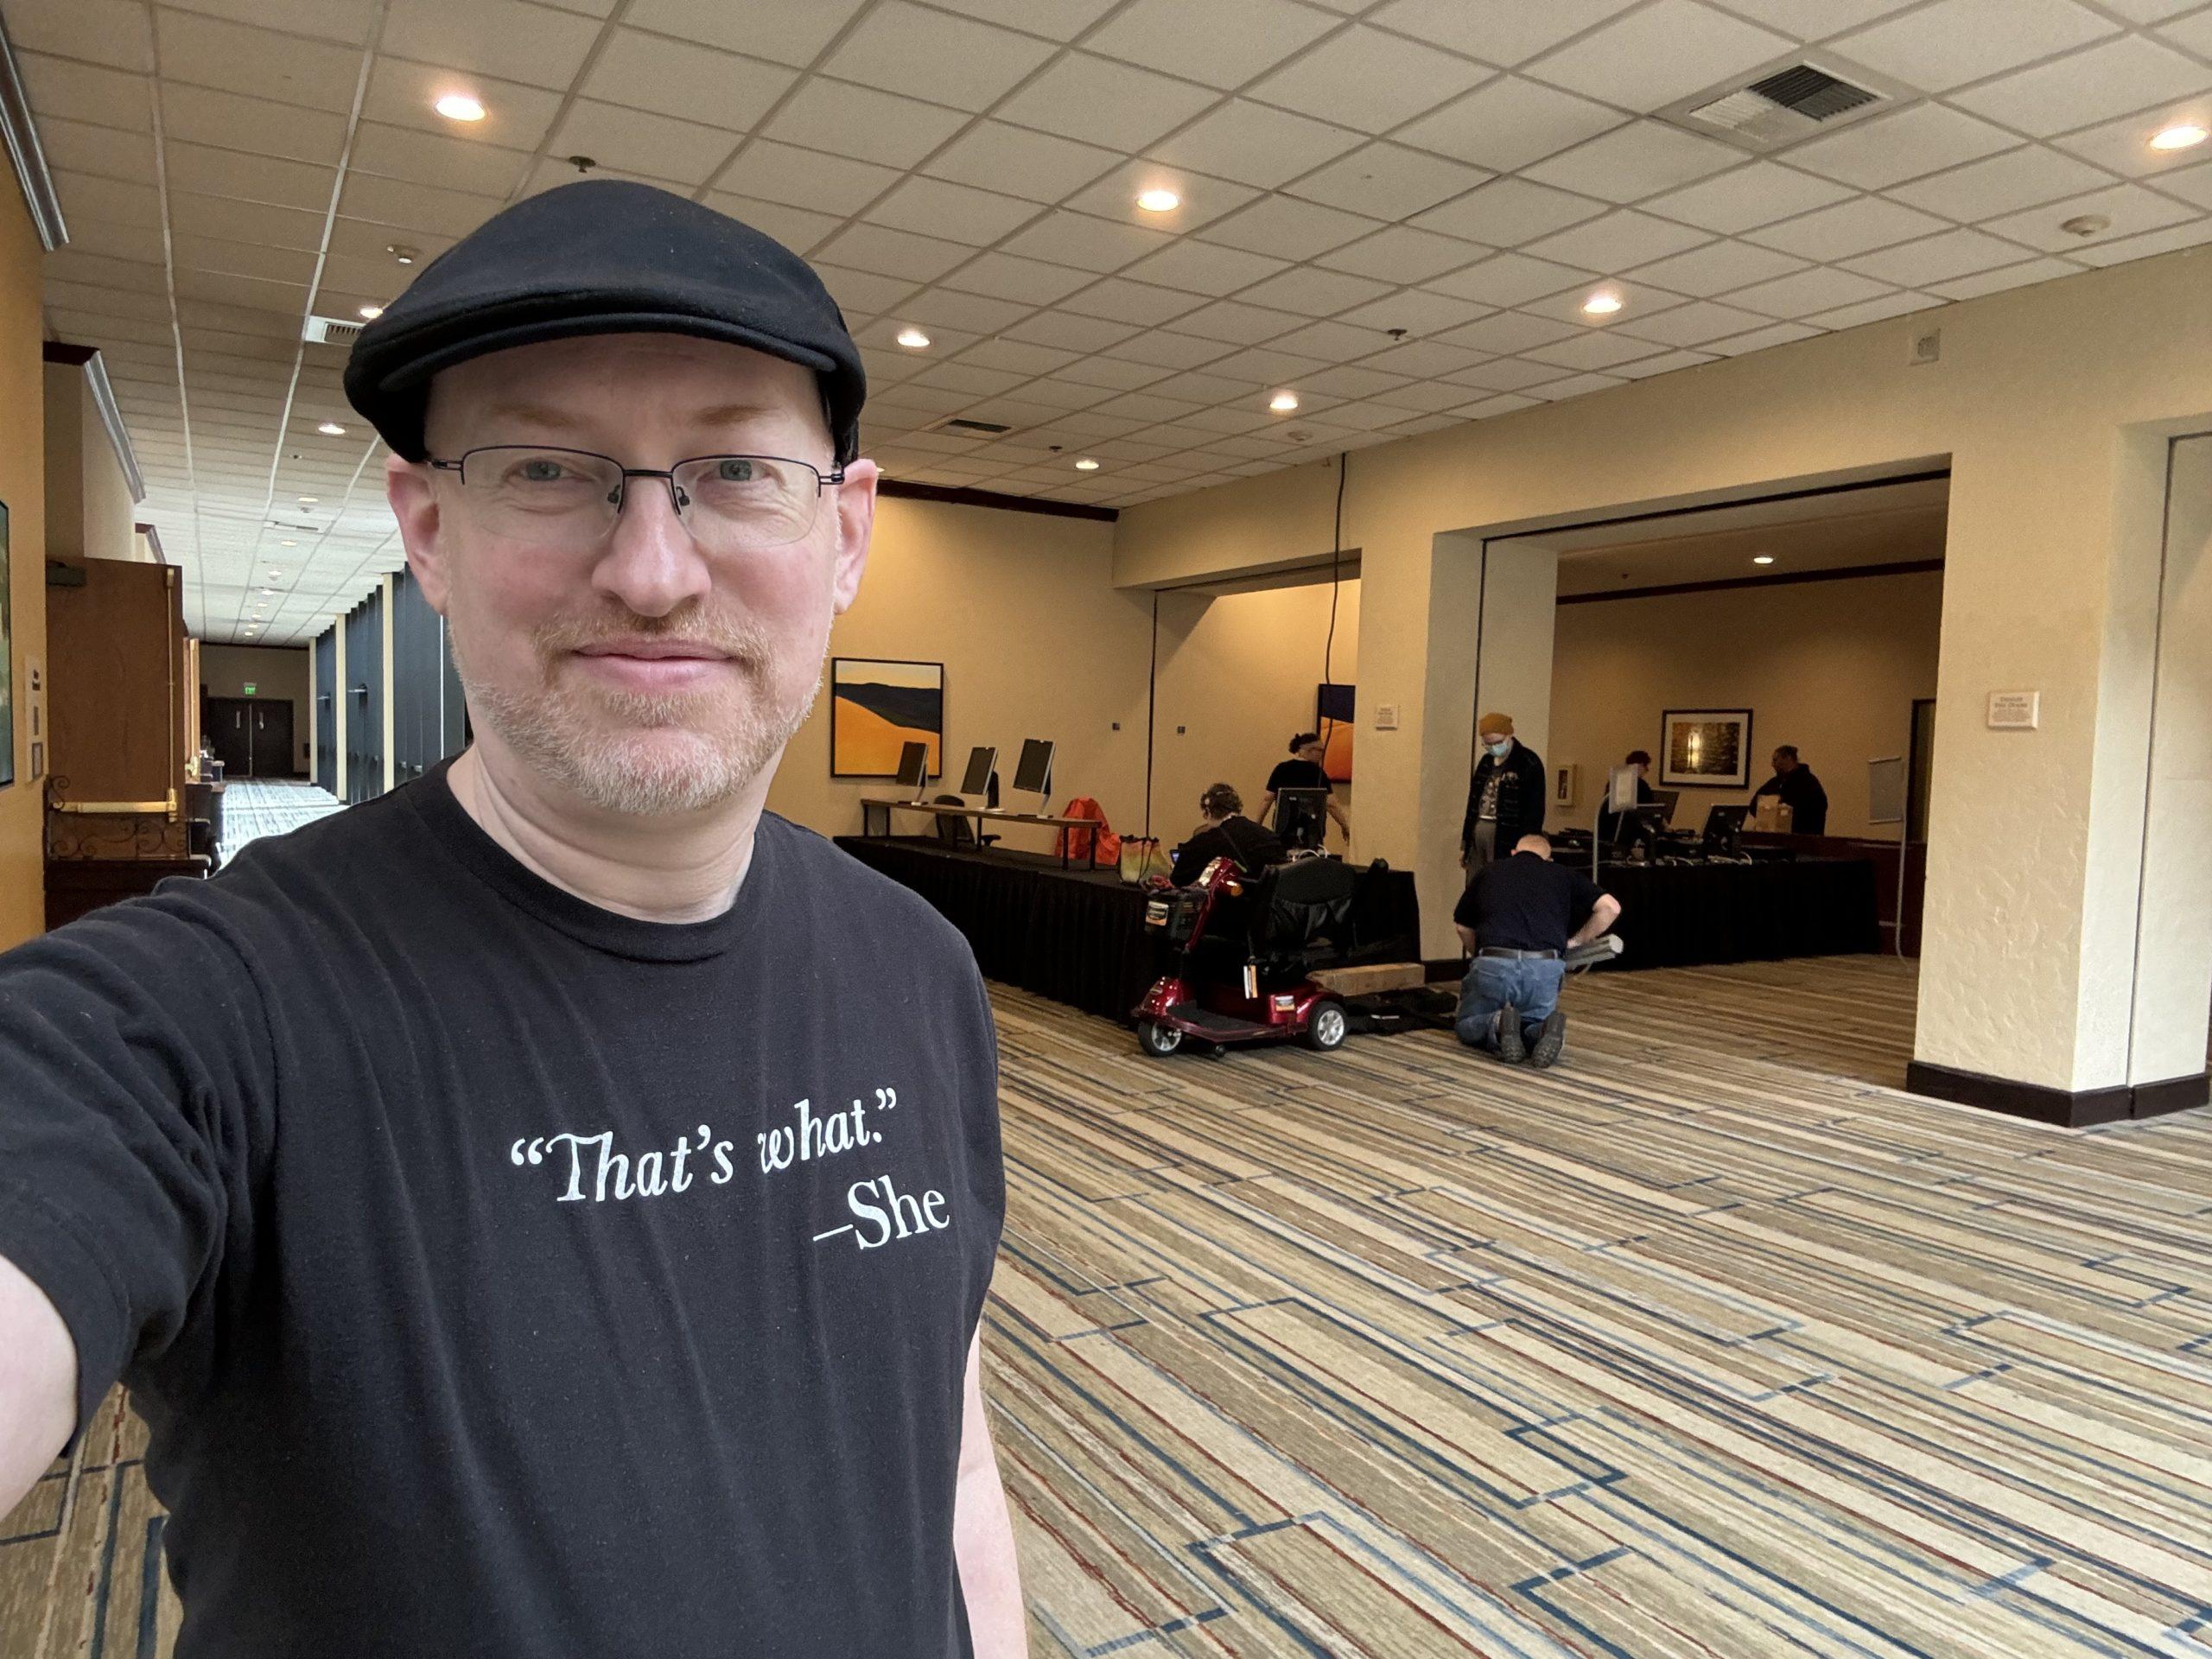 Me in a hotel lobby wearing a shirt that says, "'That's what.' She". Behind me are a few people setting up tables.